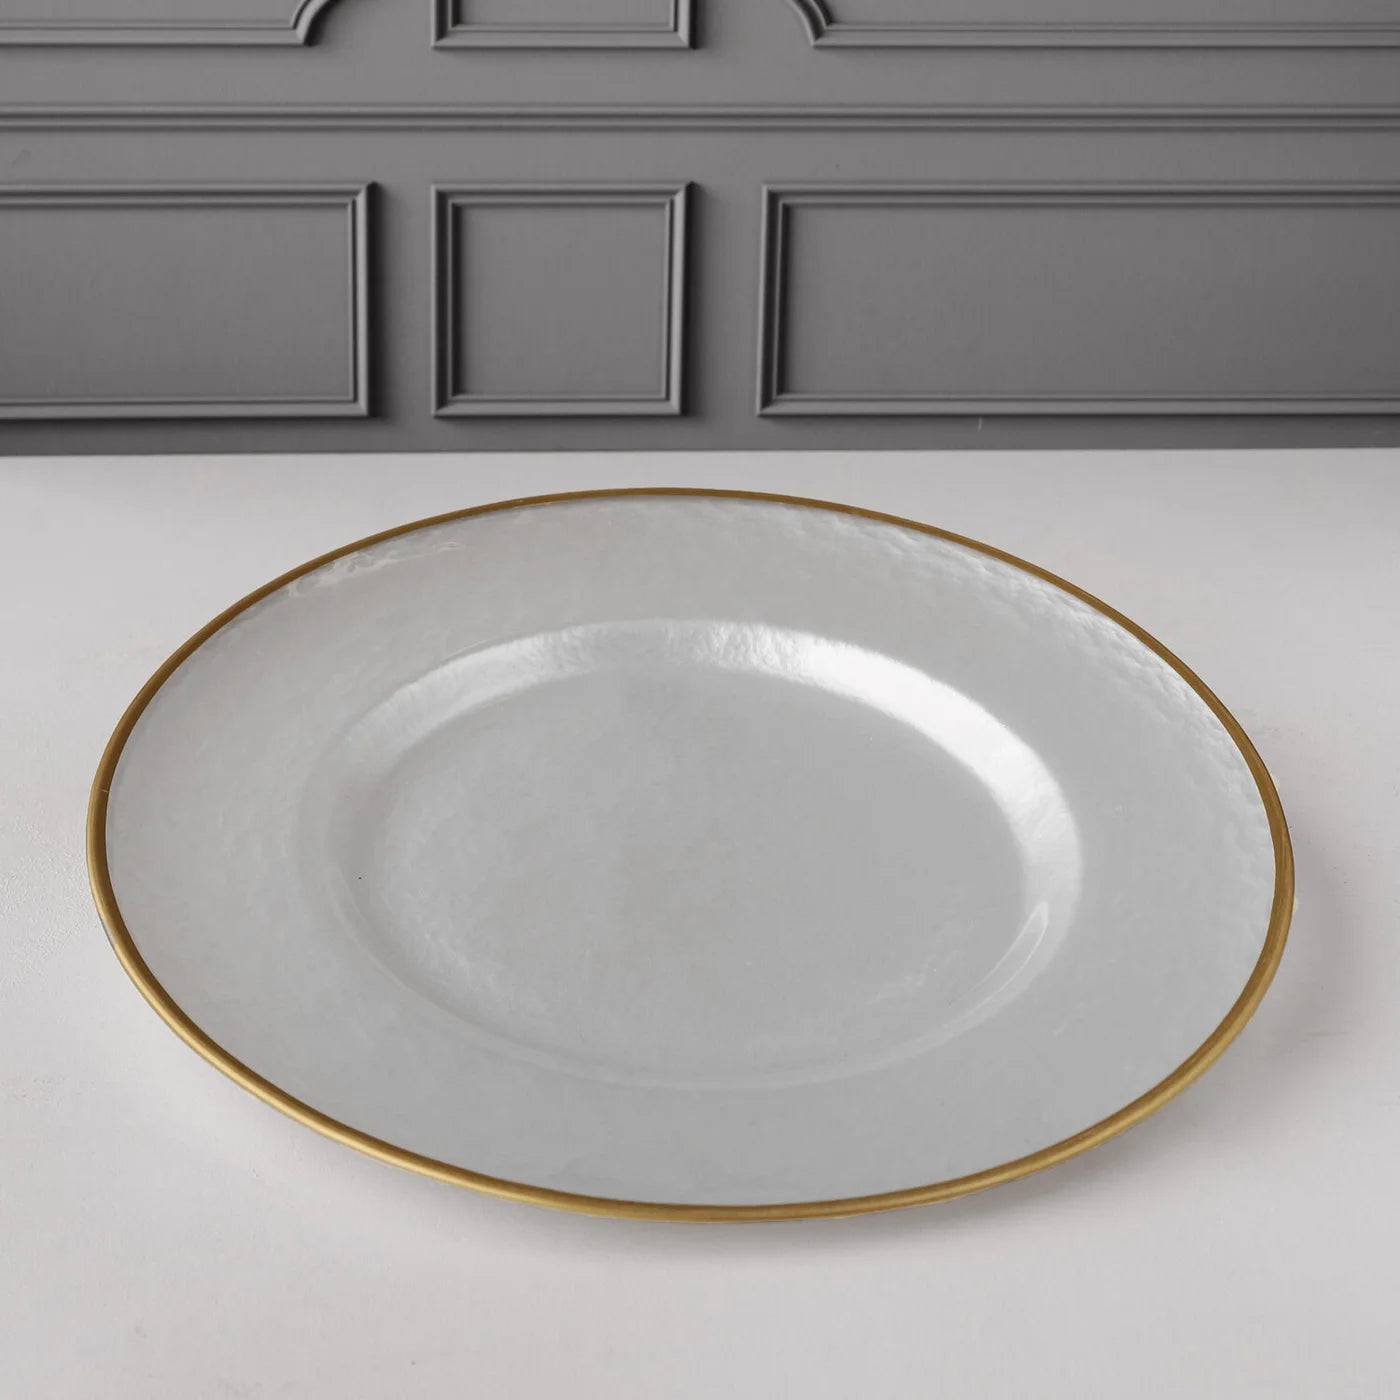 BEATRIZ BALL- GLASS White Opalescent Charger Plate with Gold Rim (White and Gold) - Findlay Rowe Designs